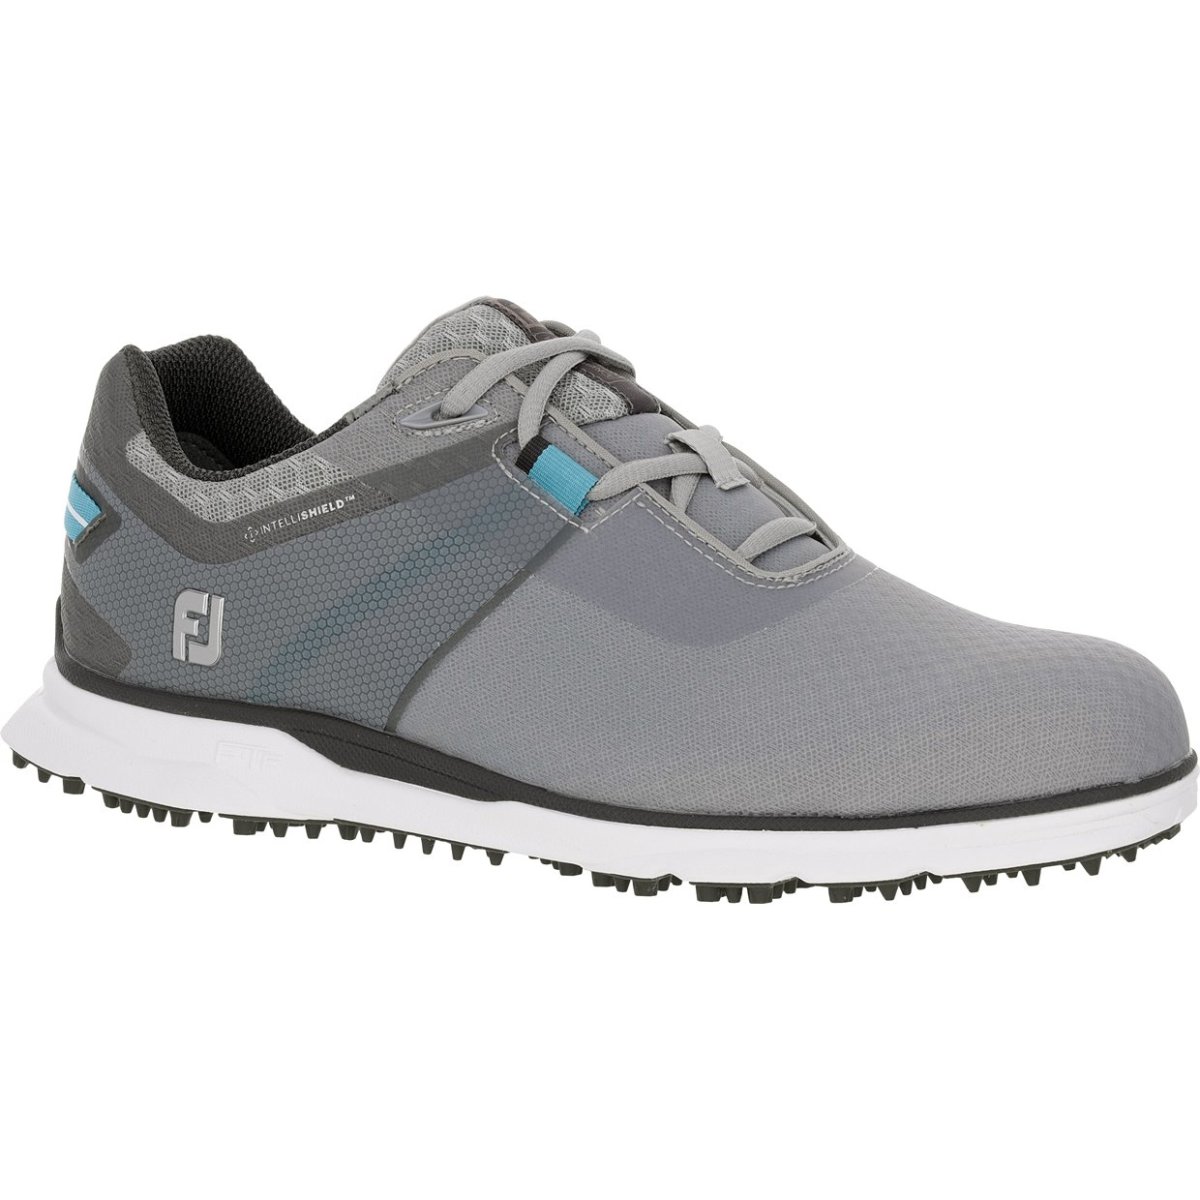 Shop the latest FootJoy golf shoes - like the Pro SL Sport spikeless golf shoes - on Morning Read's pro shop.